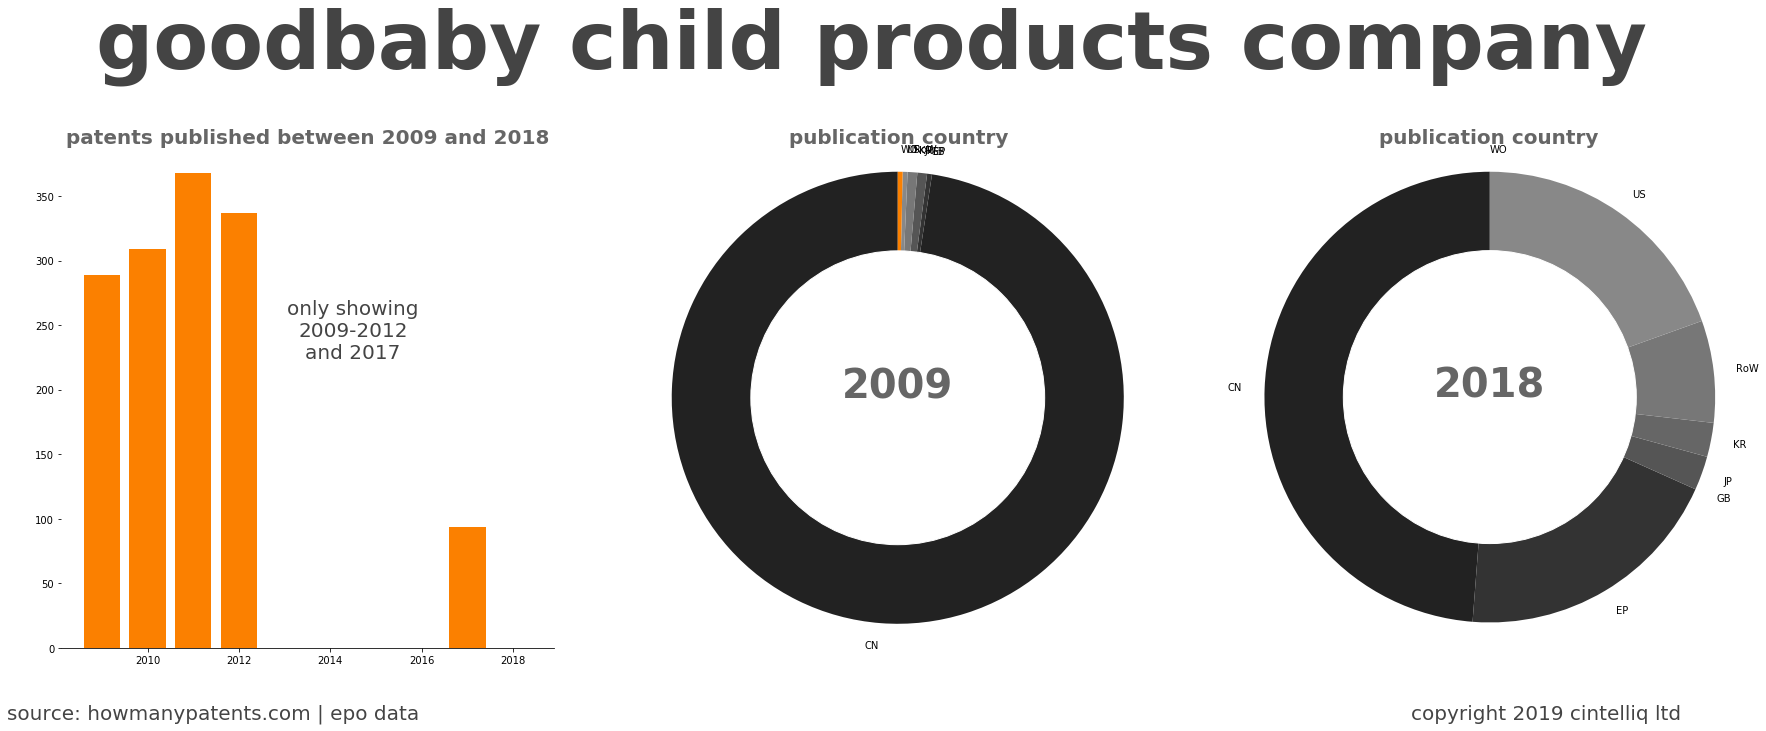 summary of patents for Goodbaby Child Products Company